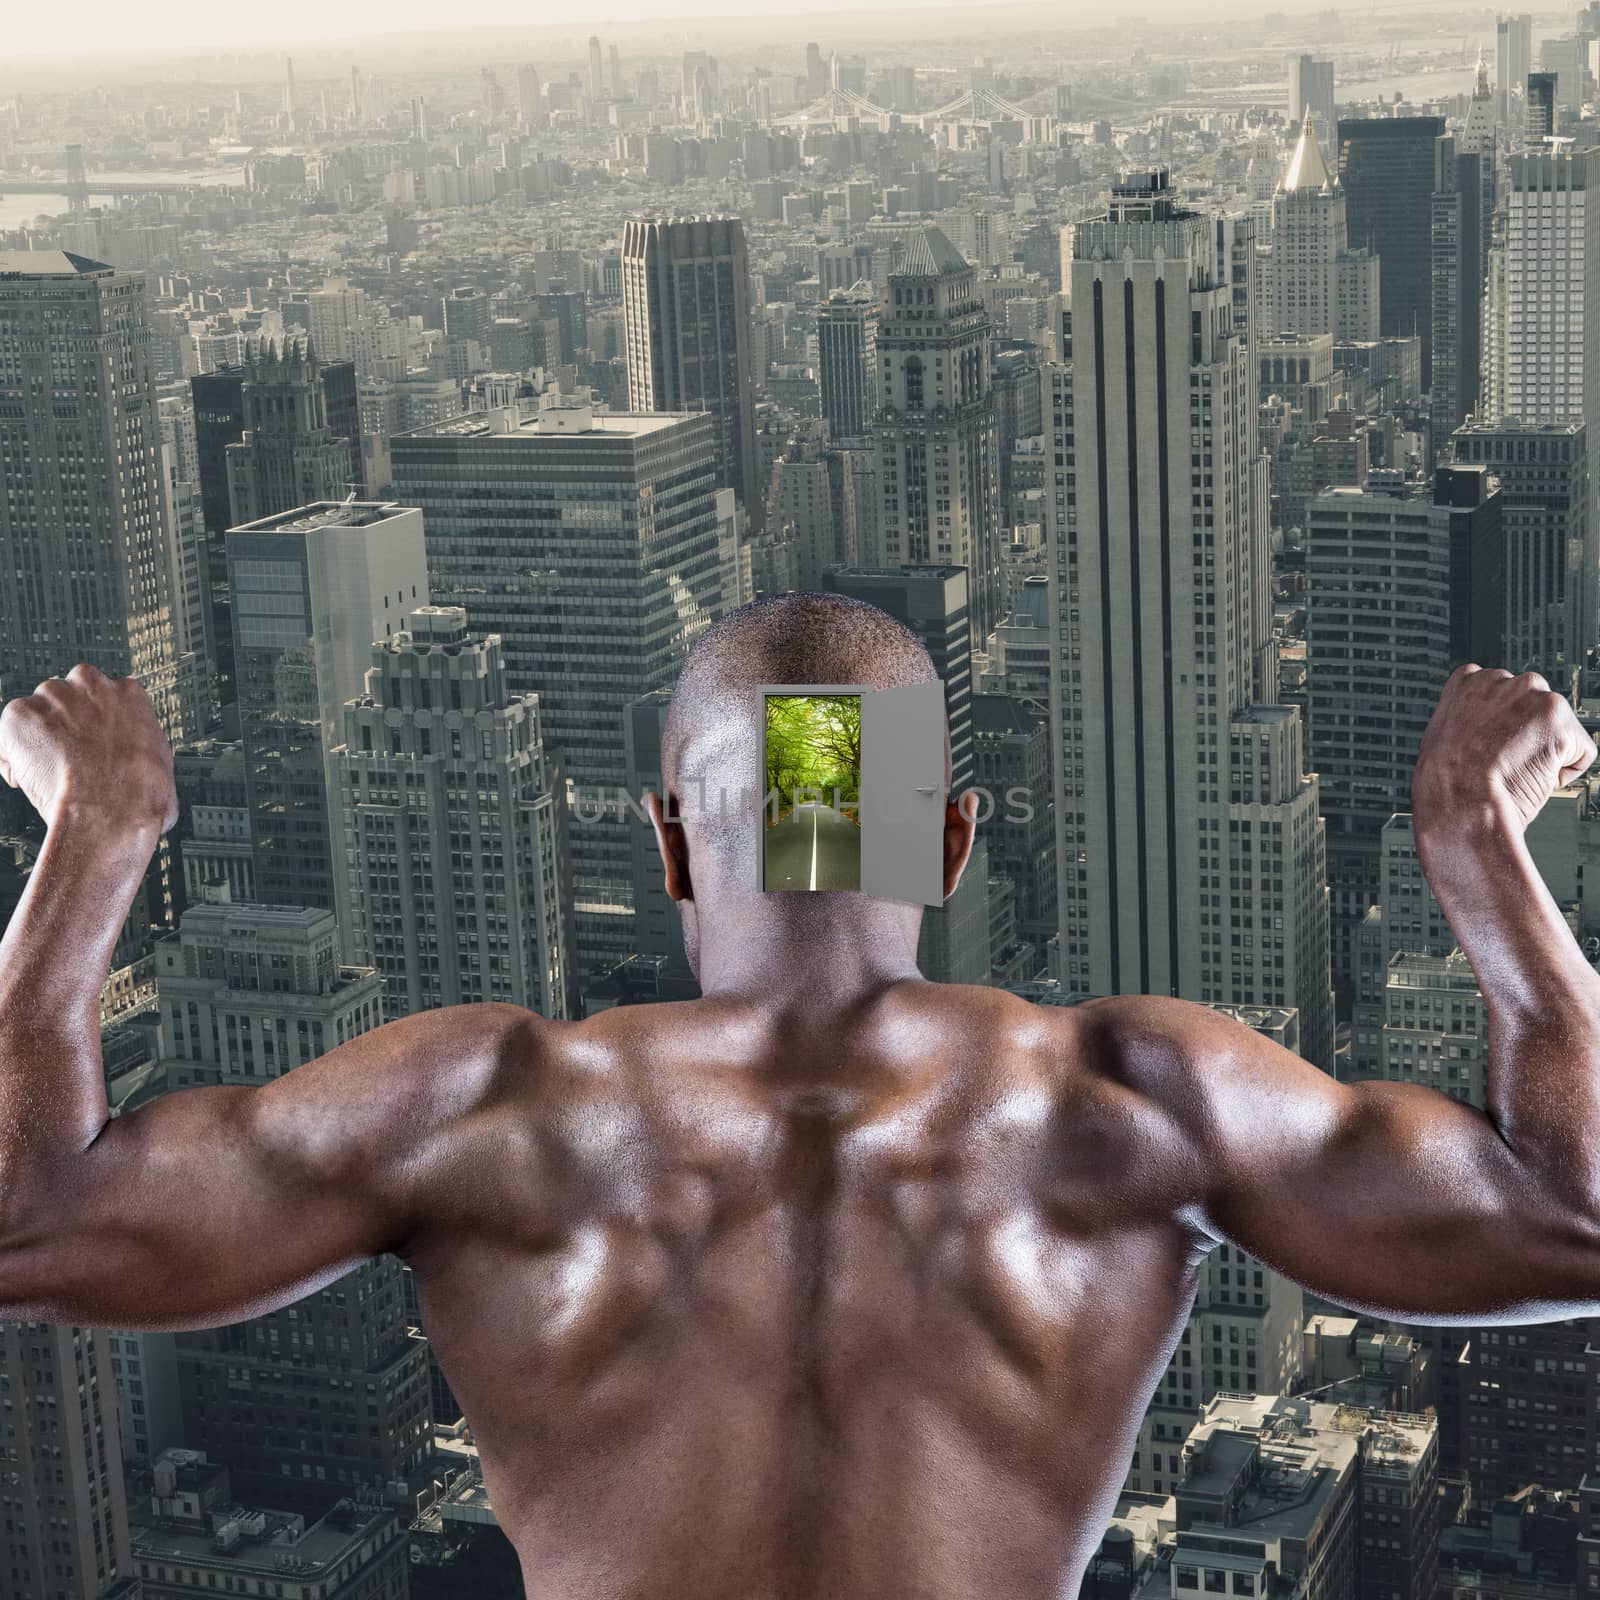 Rear view of muscular athlete posing against view of cityscape